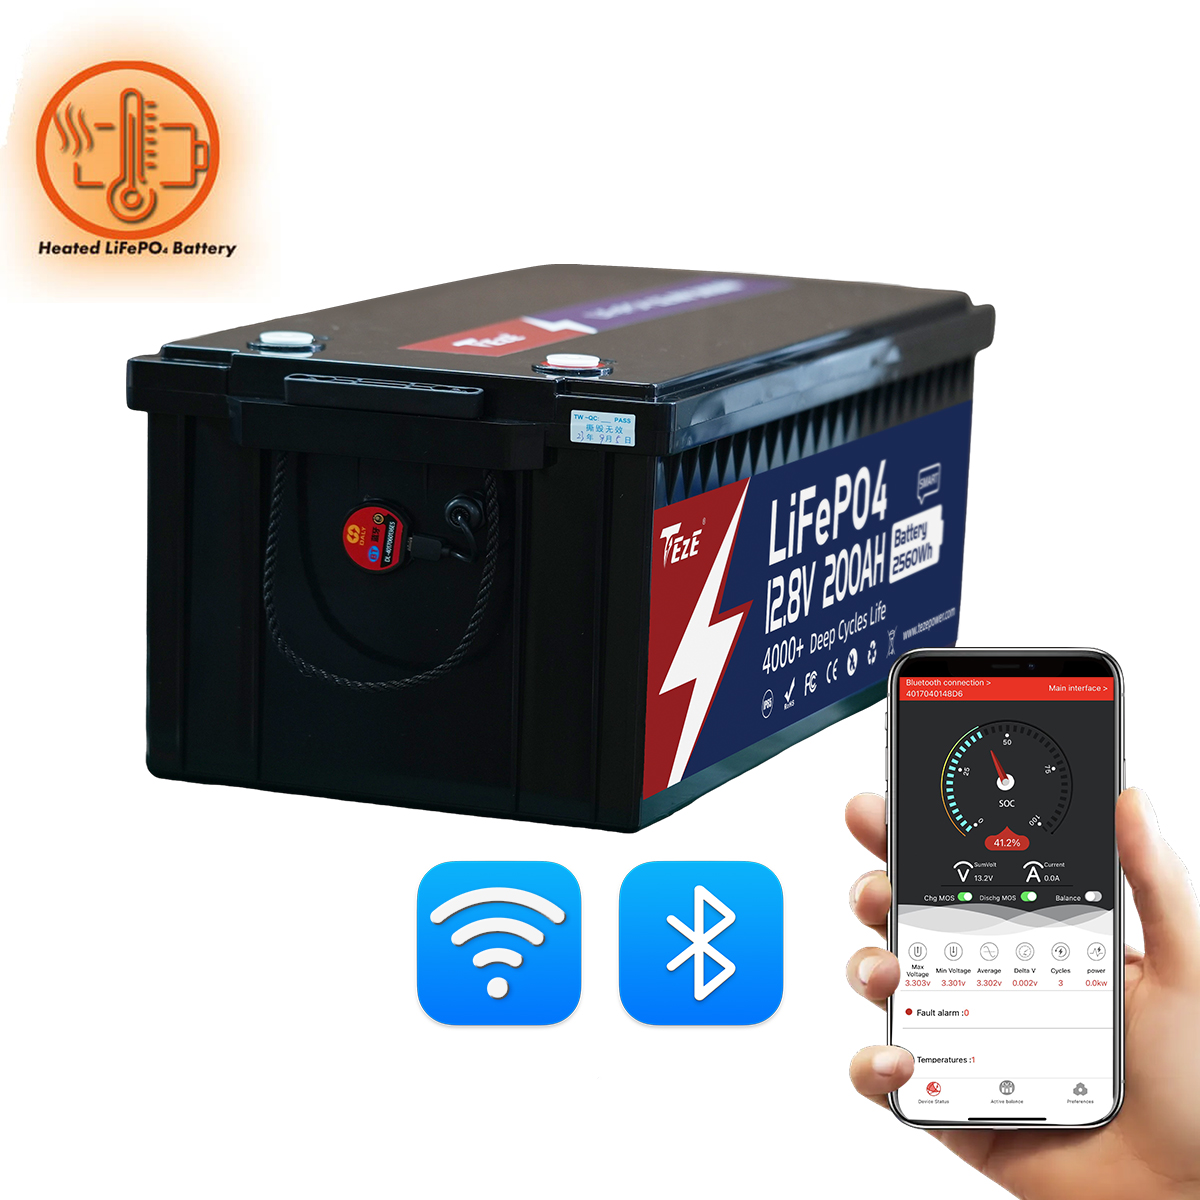 New Add WiFi-TezePower 12V 200Ah LiFePO4 Battery with WIFI and Bluetooth, Self-heating and Active Balancer, Built-in 200A Daly BMS(WIFI External Version)